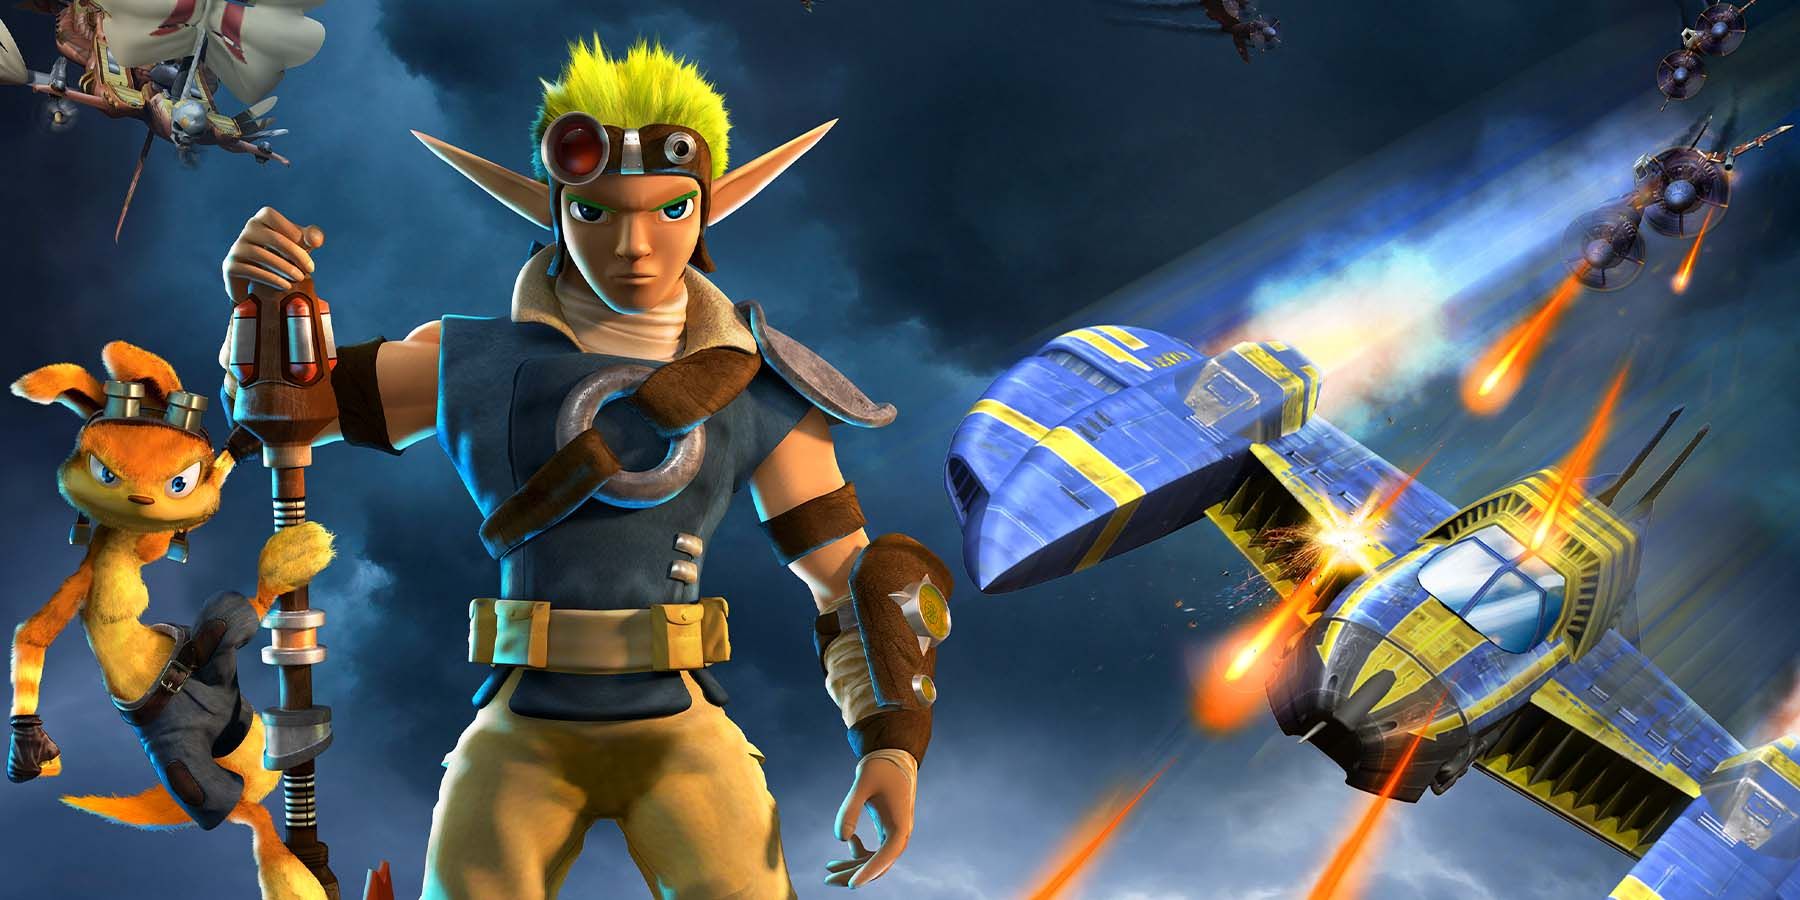 Jak & Daxter : The Lost Frontier